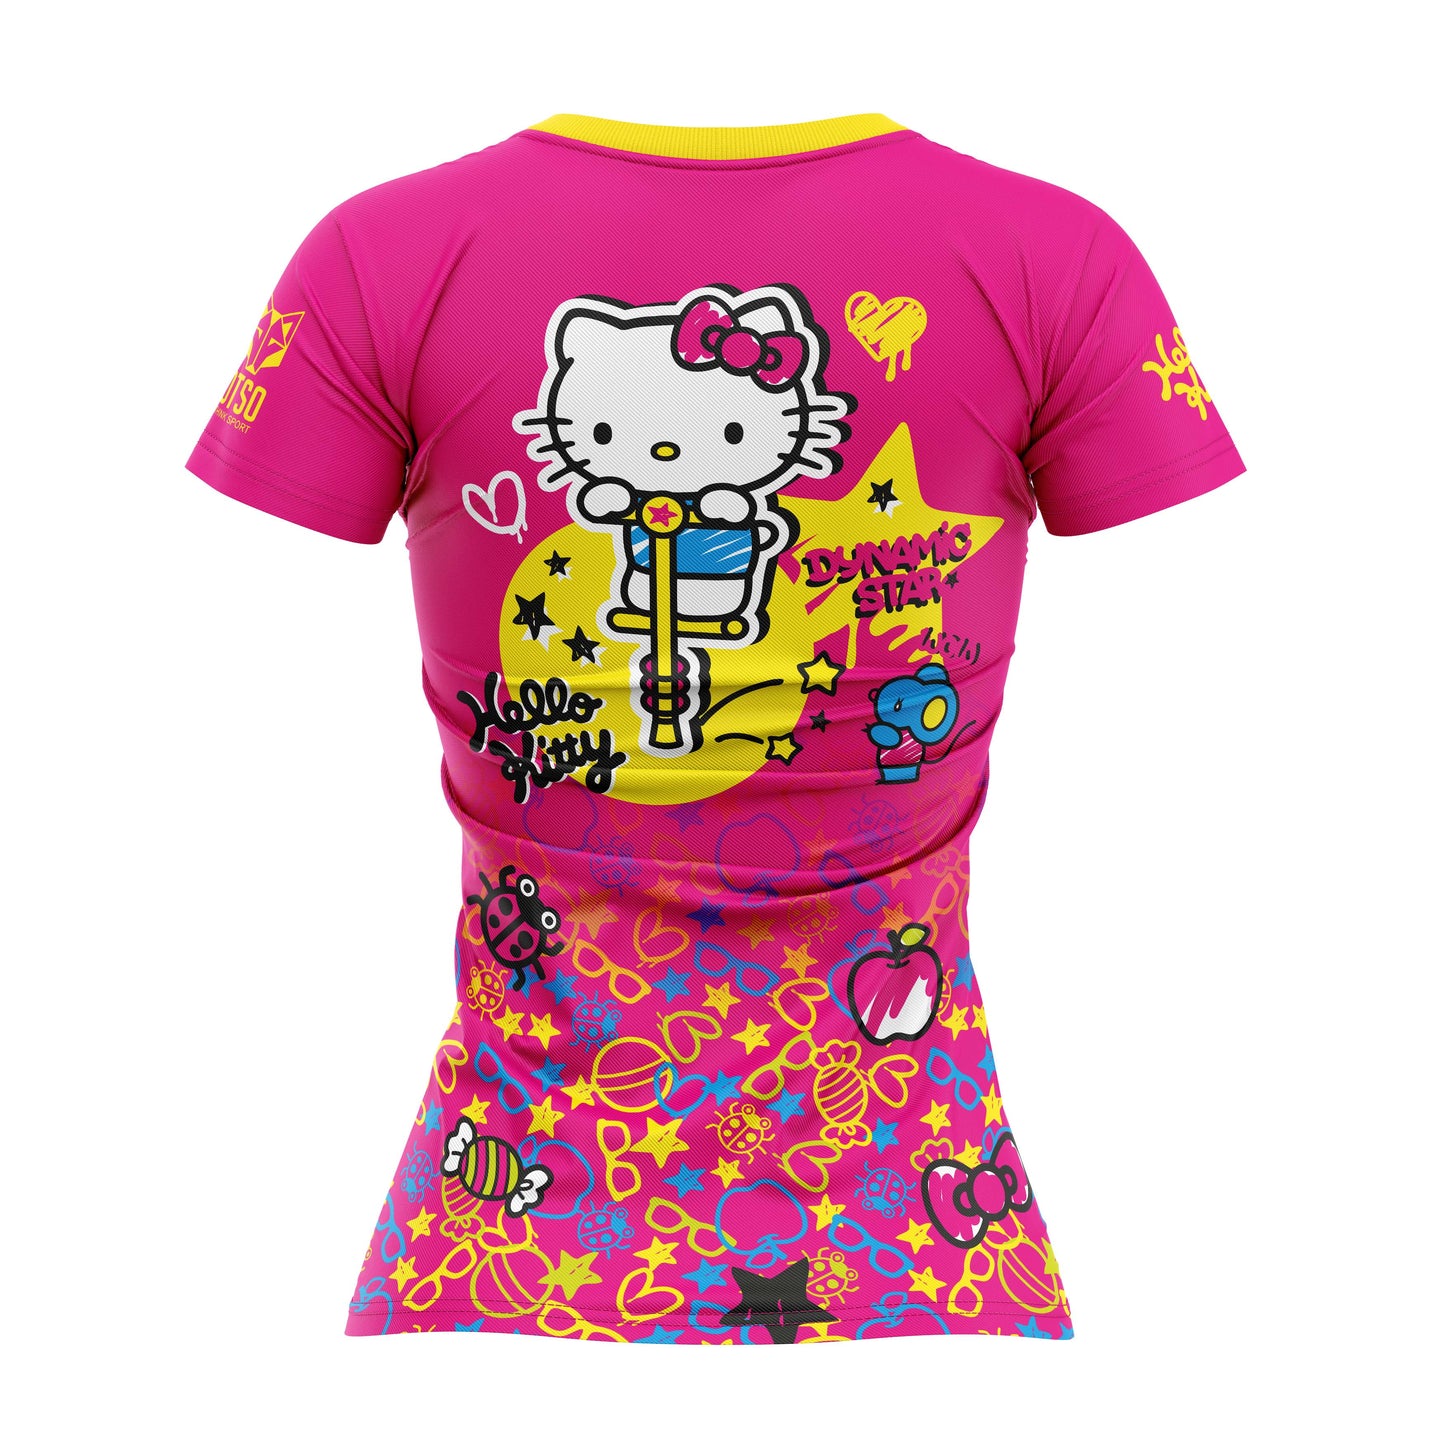 Short sleeve t-shirt for girls and women - Hello Kitty Sparkle